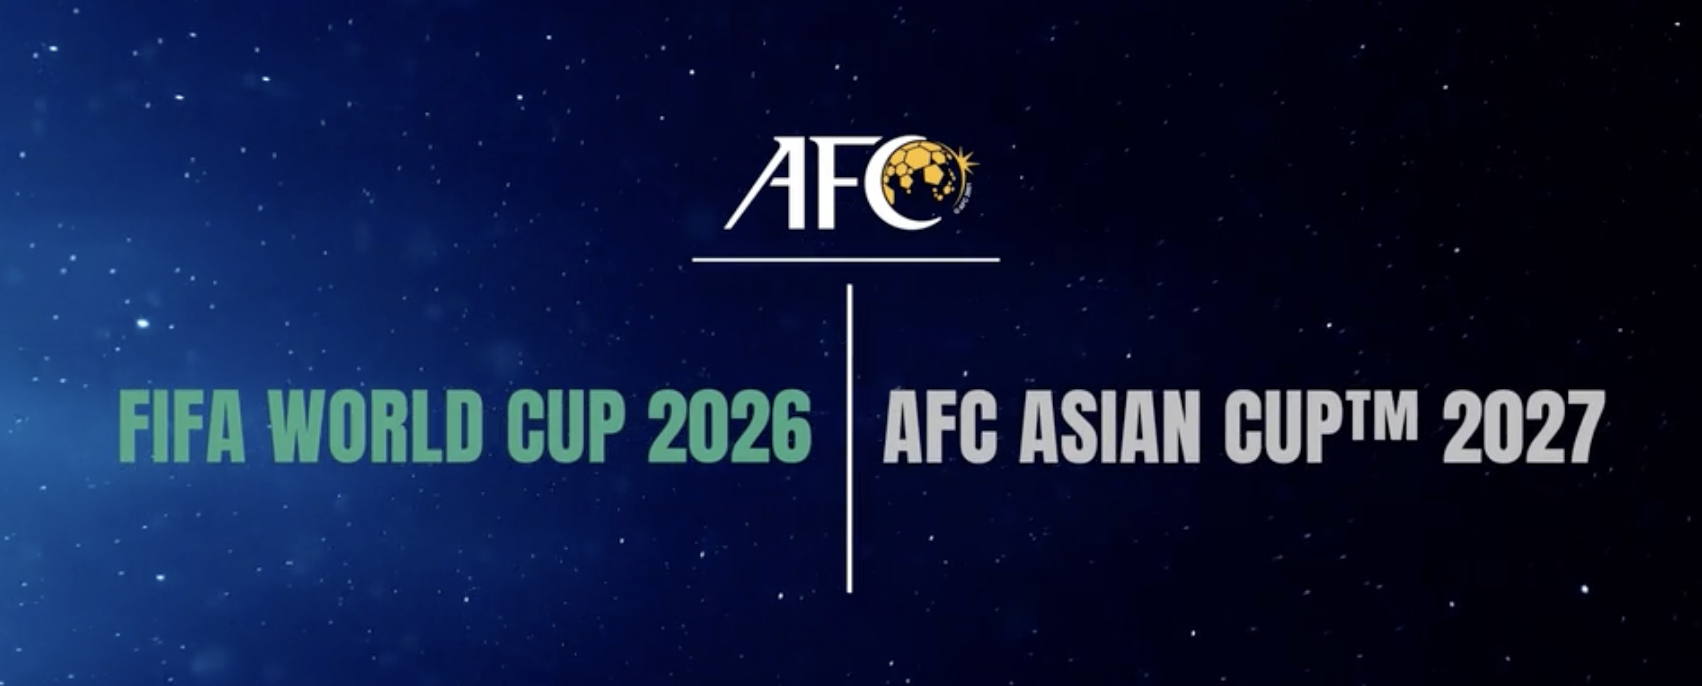 AFC outlines qualification path for 2026 World Cup and 2027 Asian Cup